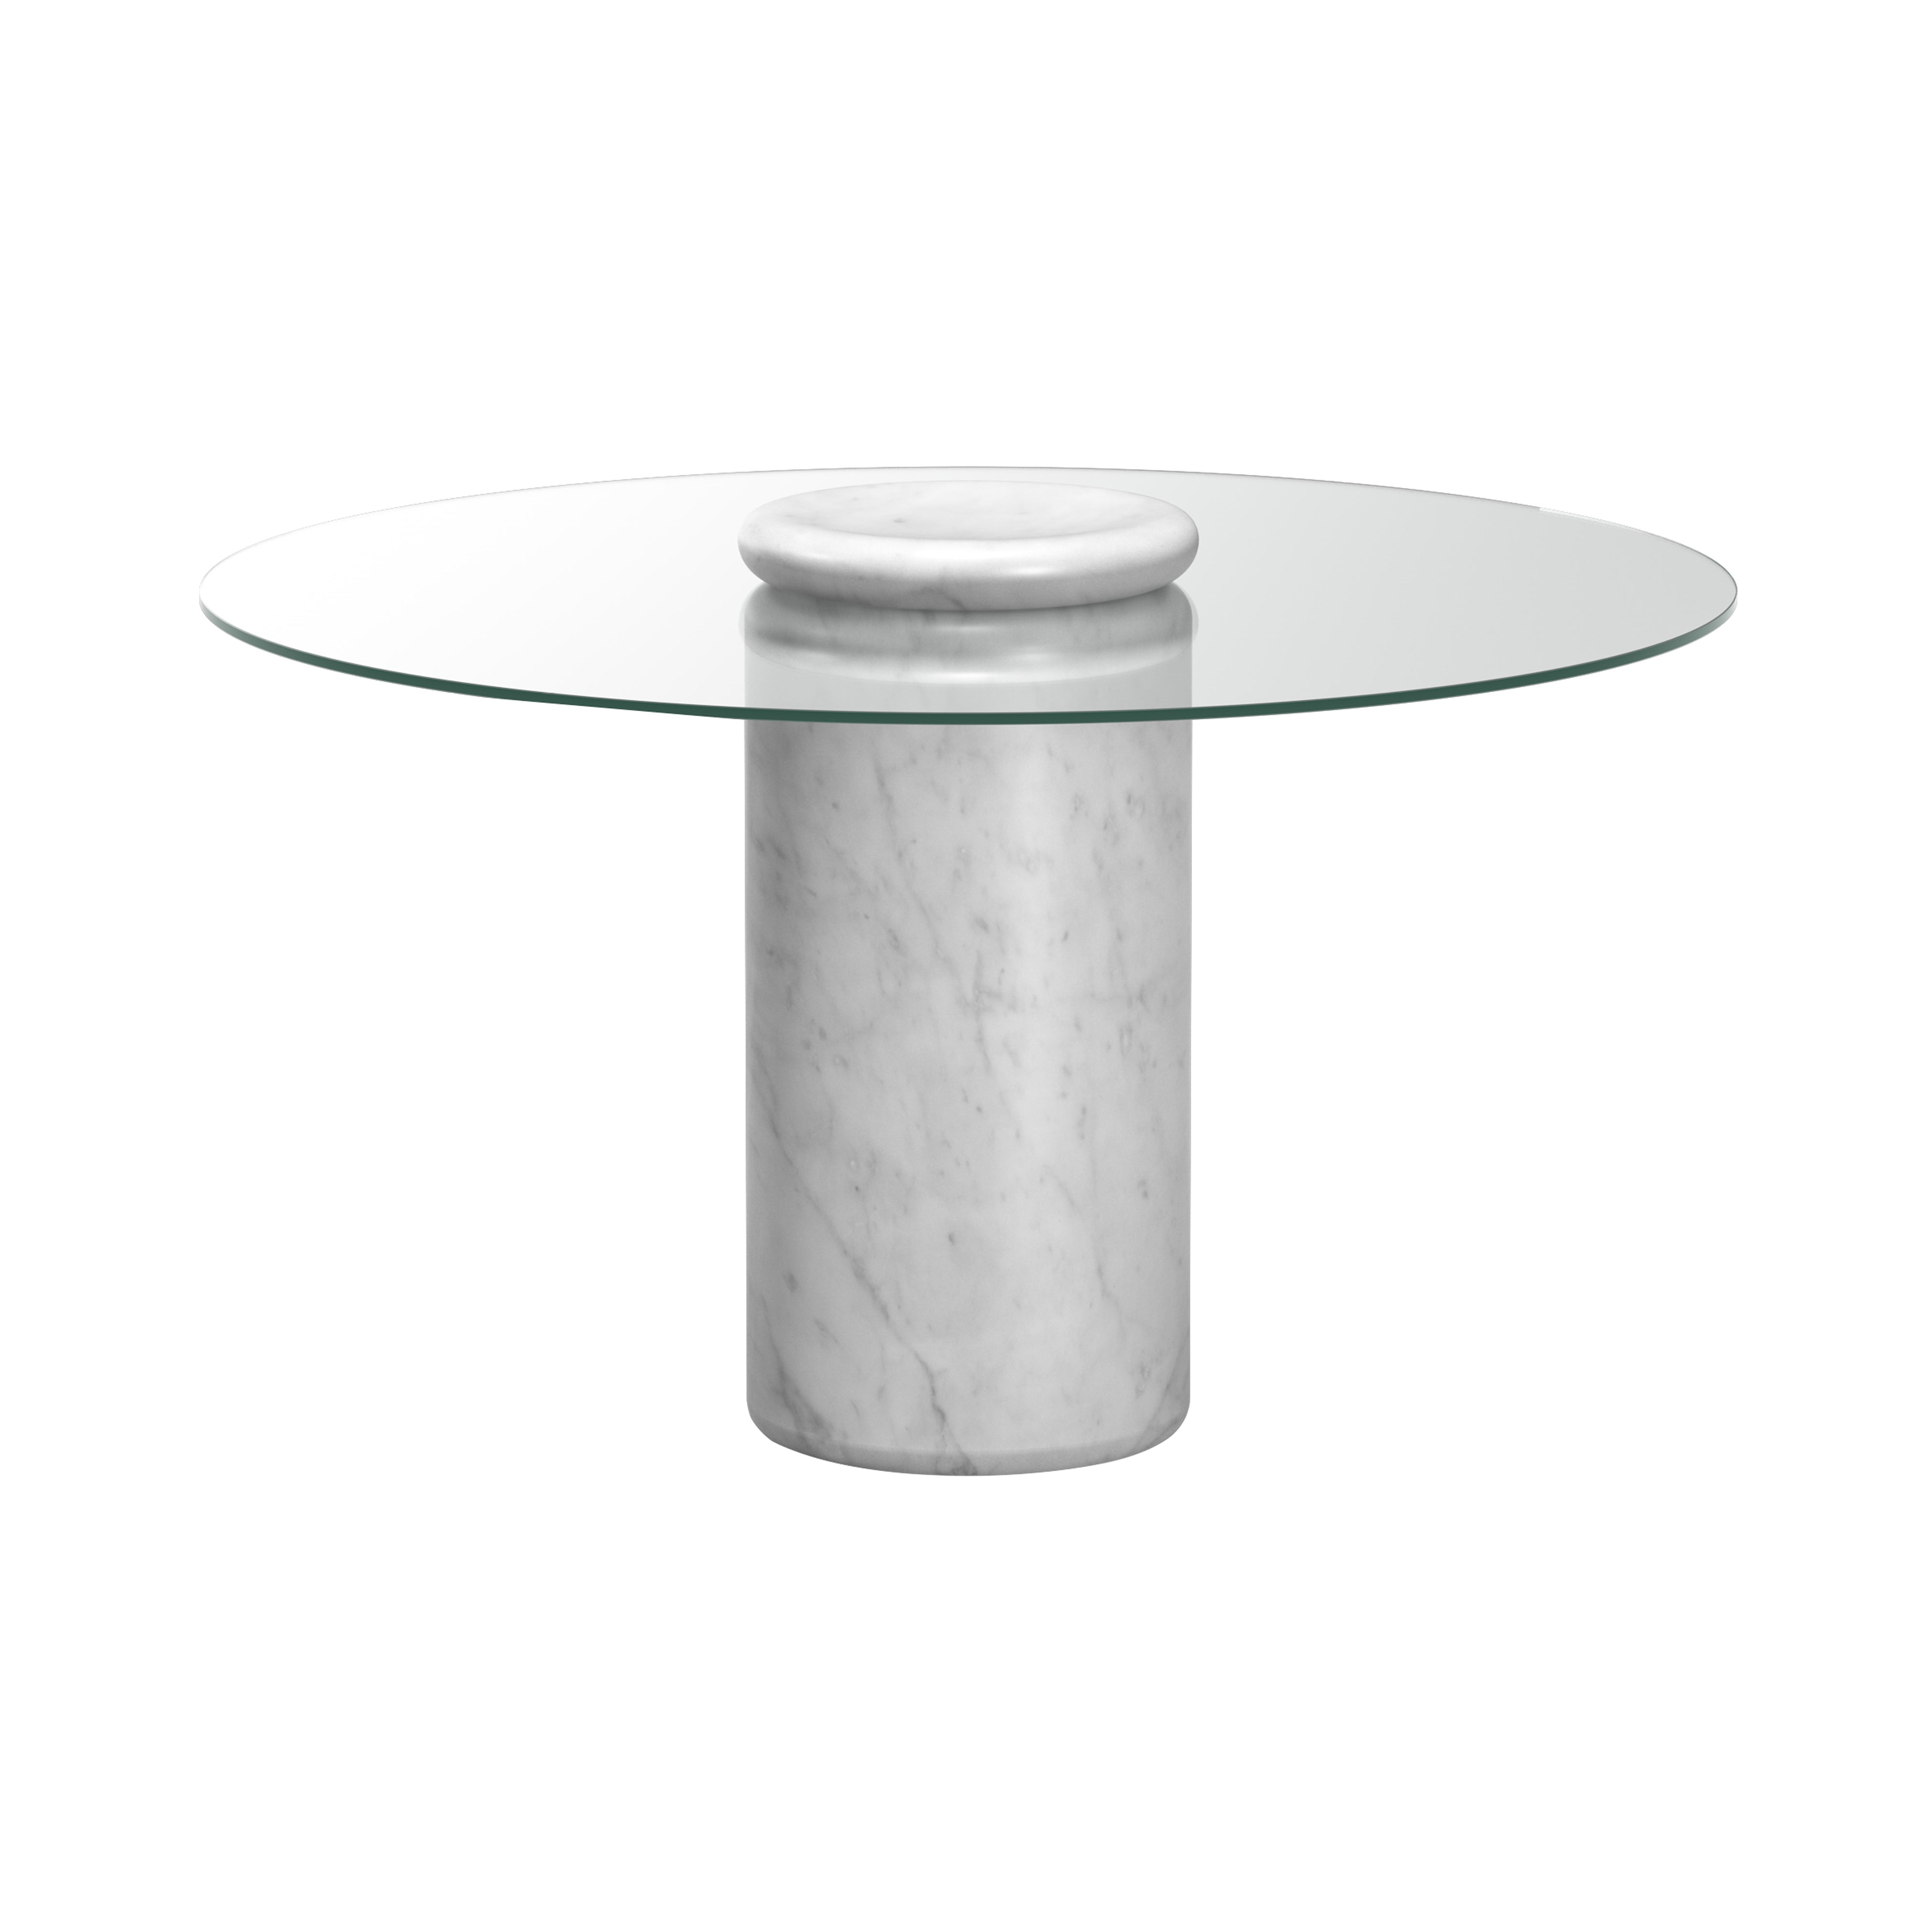 Castore Dining Table: Clear Glass + Bianco Carrara Marble